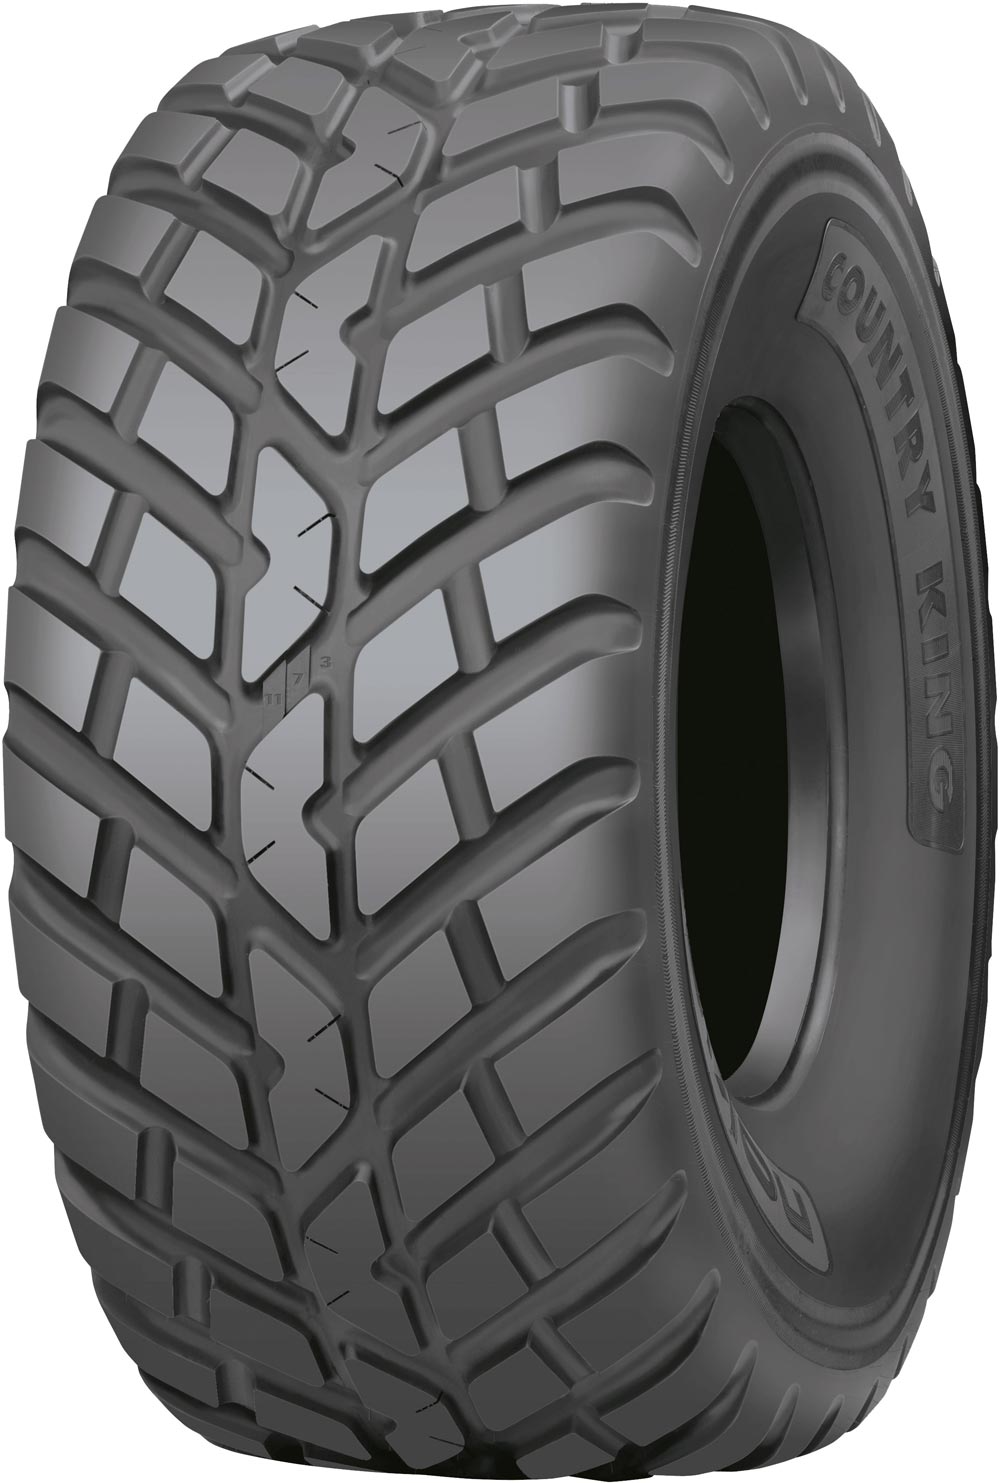 product_type-industrial_tires NOKIAN COUNTRY KING TL 500/60 R22.5 155D